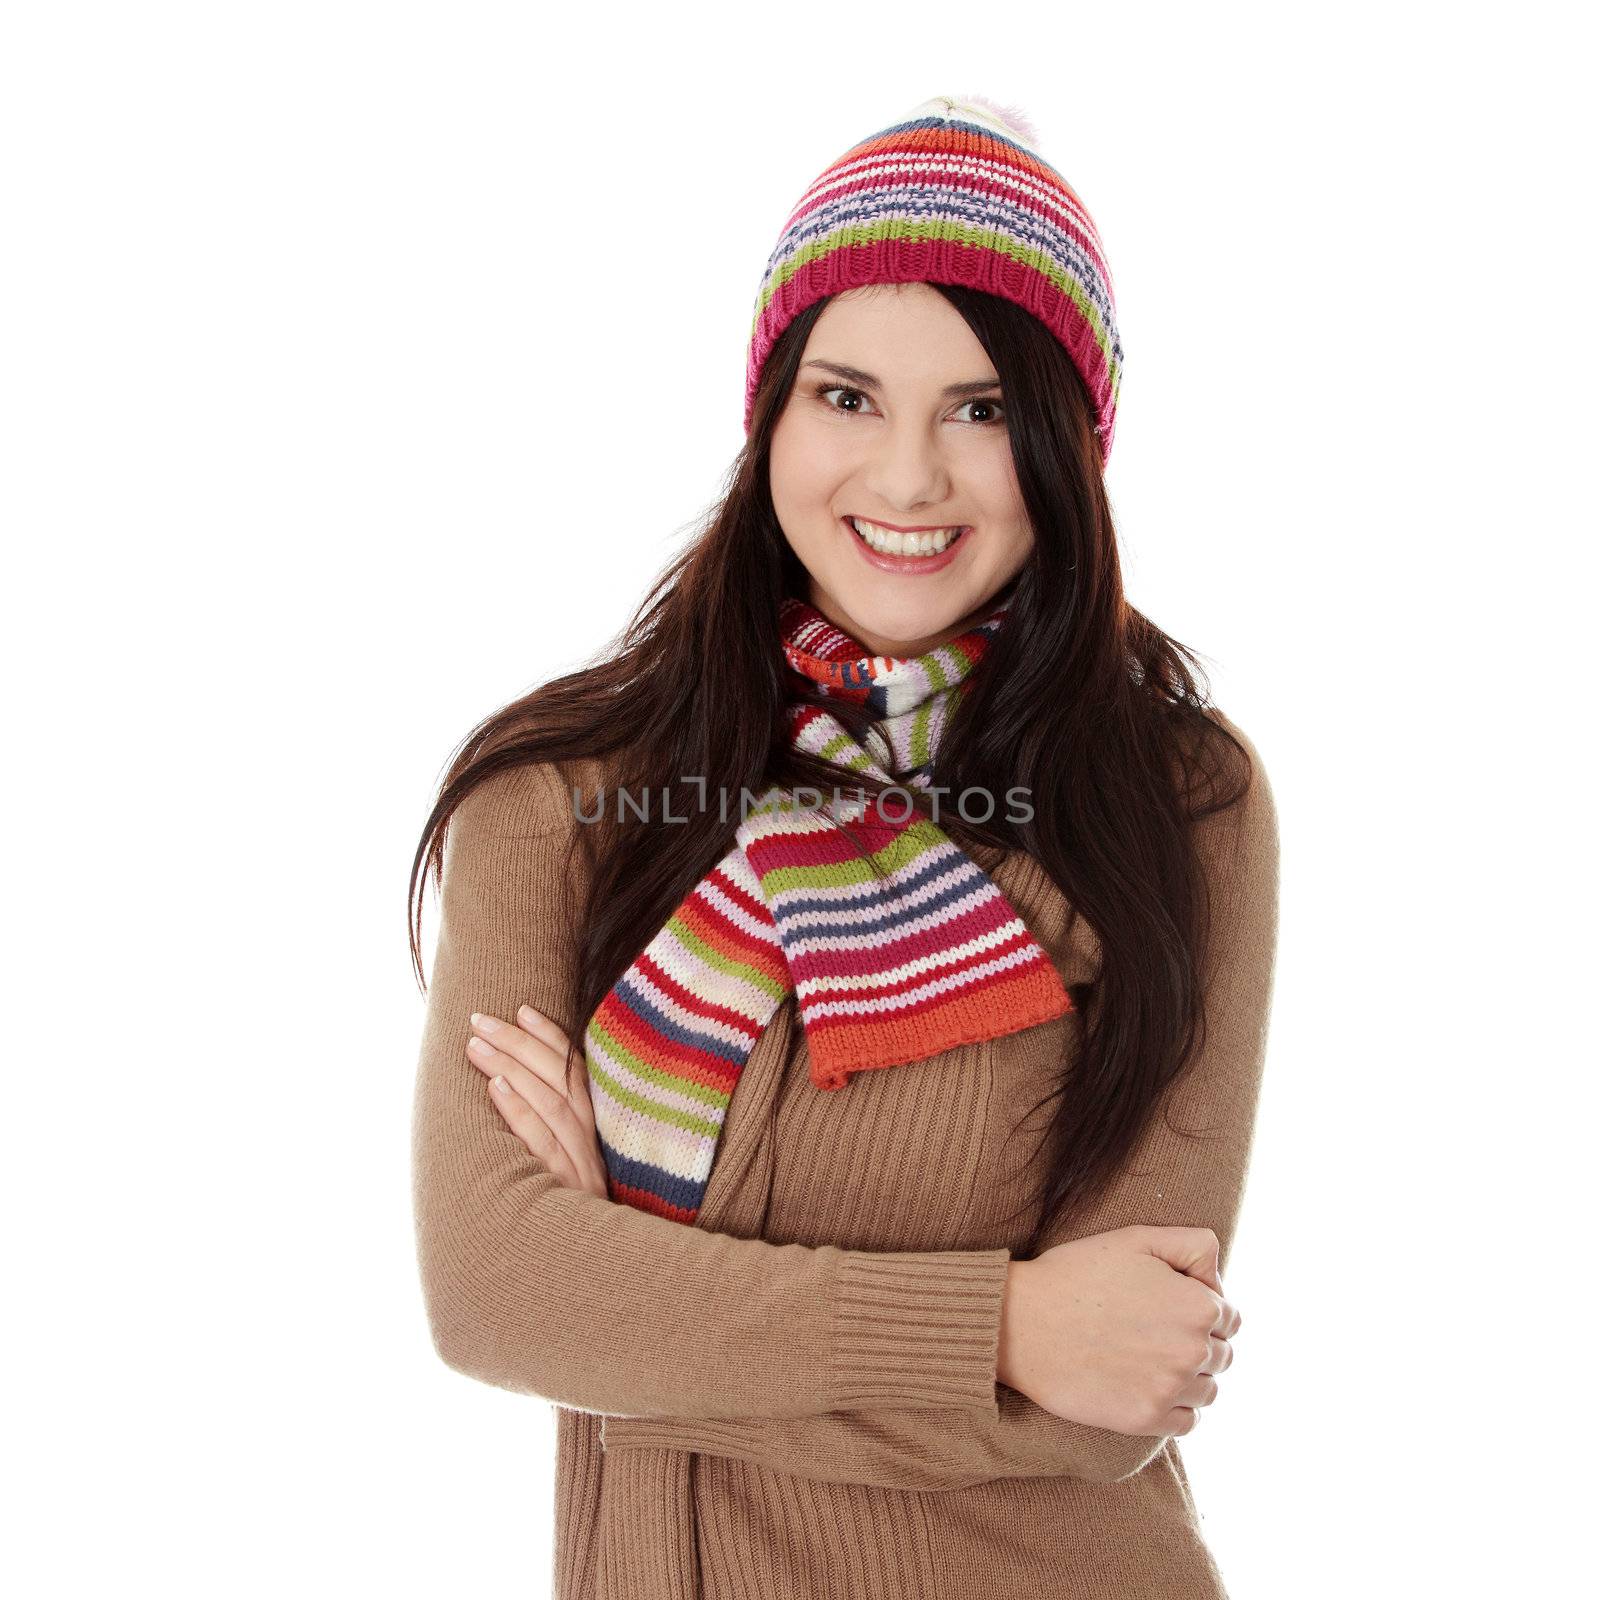 Close up of young woman with winter cap smiling at the camera isoalted on white background